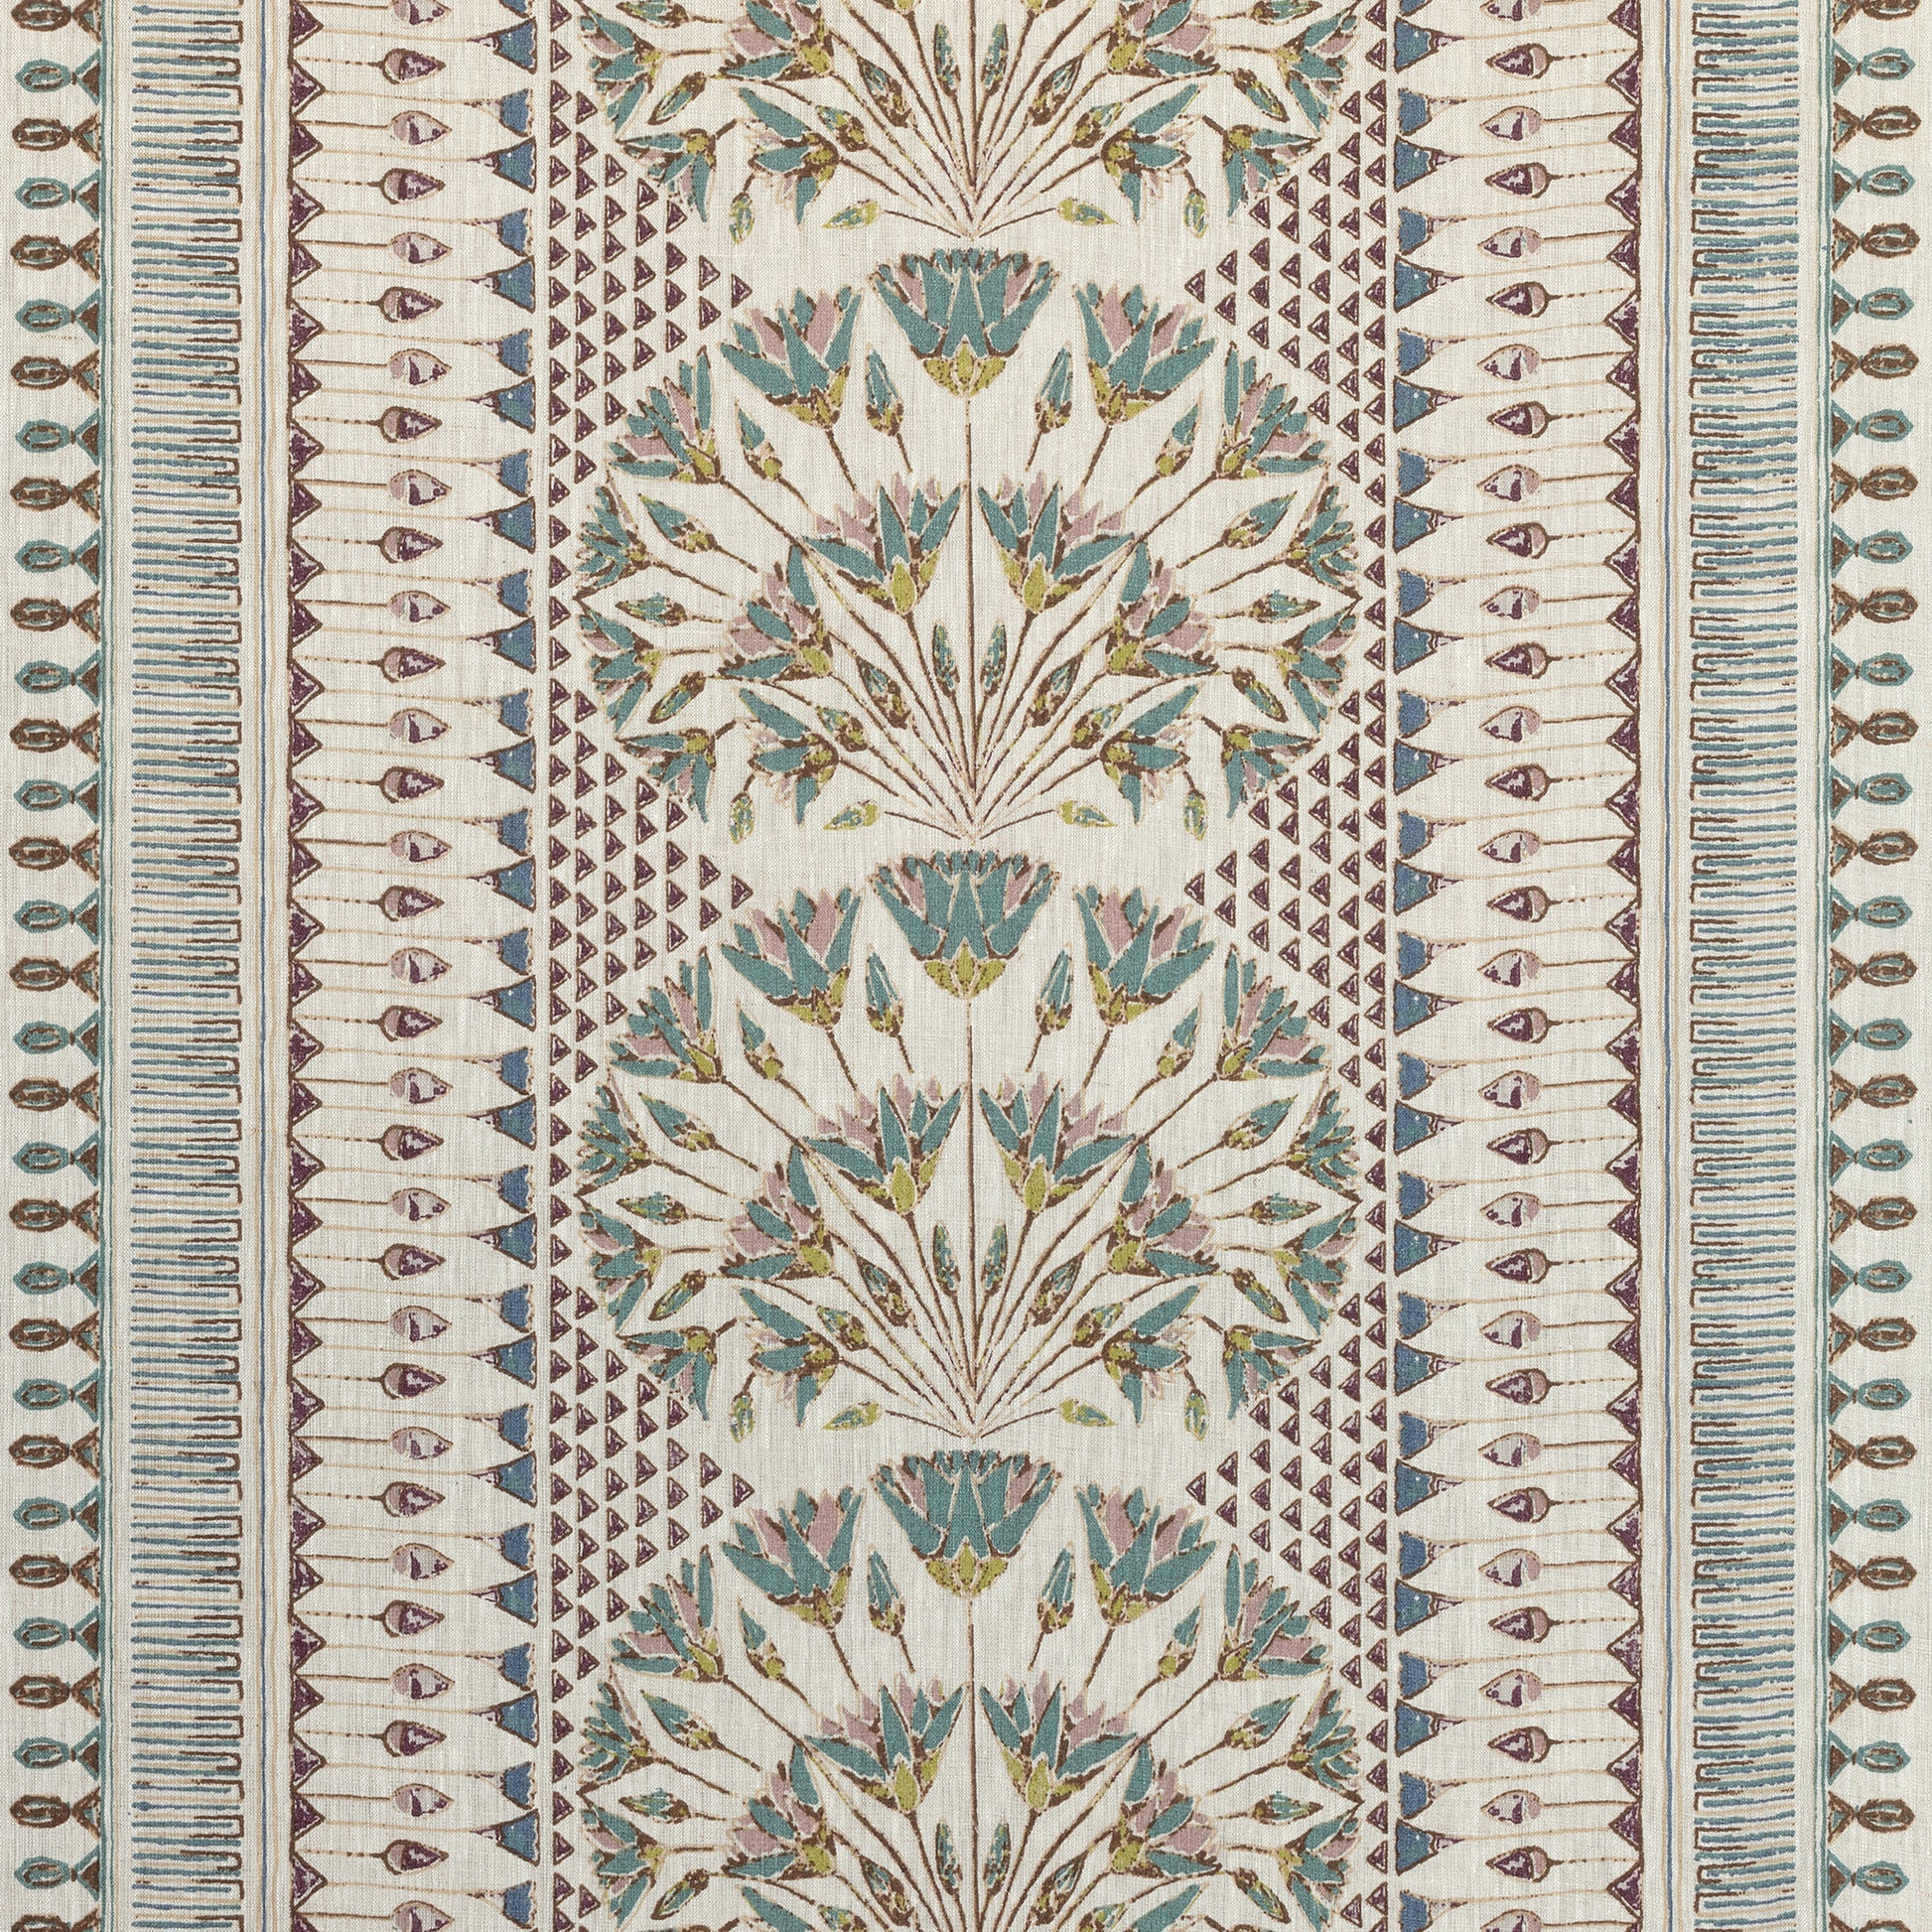 Purchase  Ann French Fabric Pattern# AF9626  pattern name  Cairo